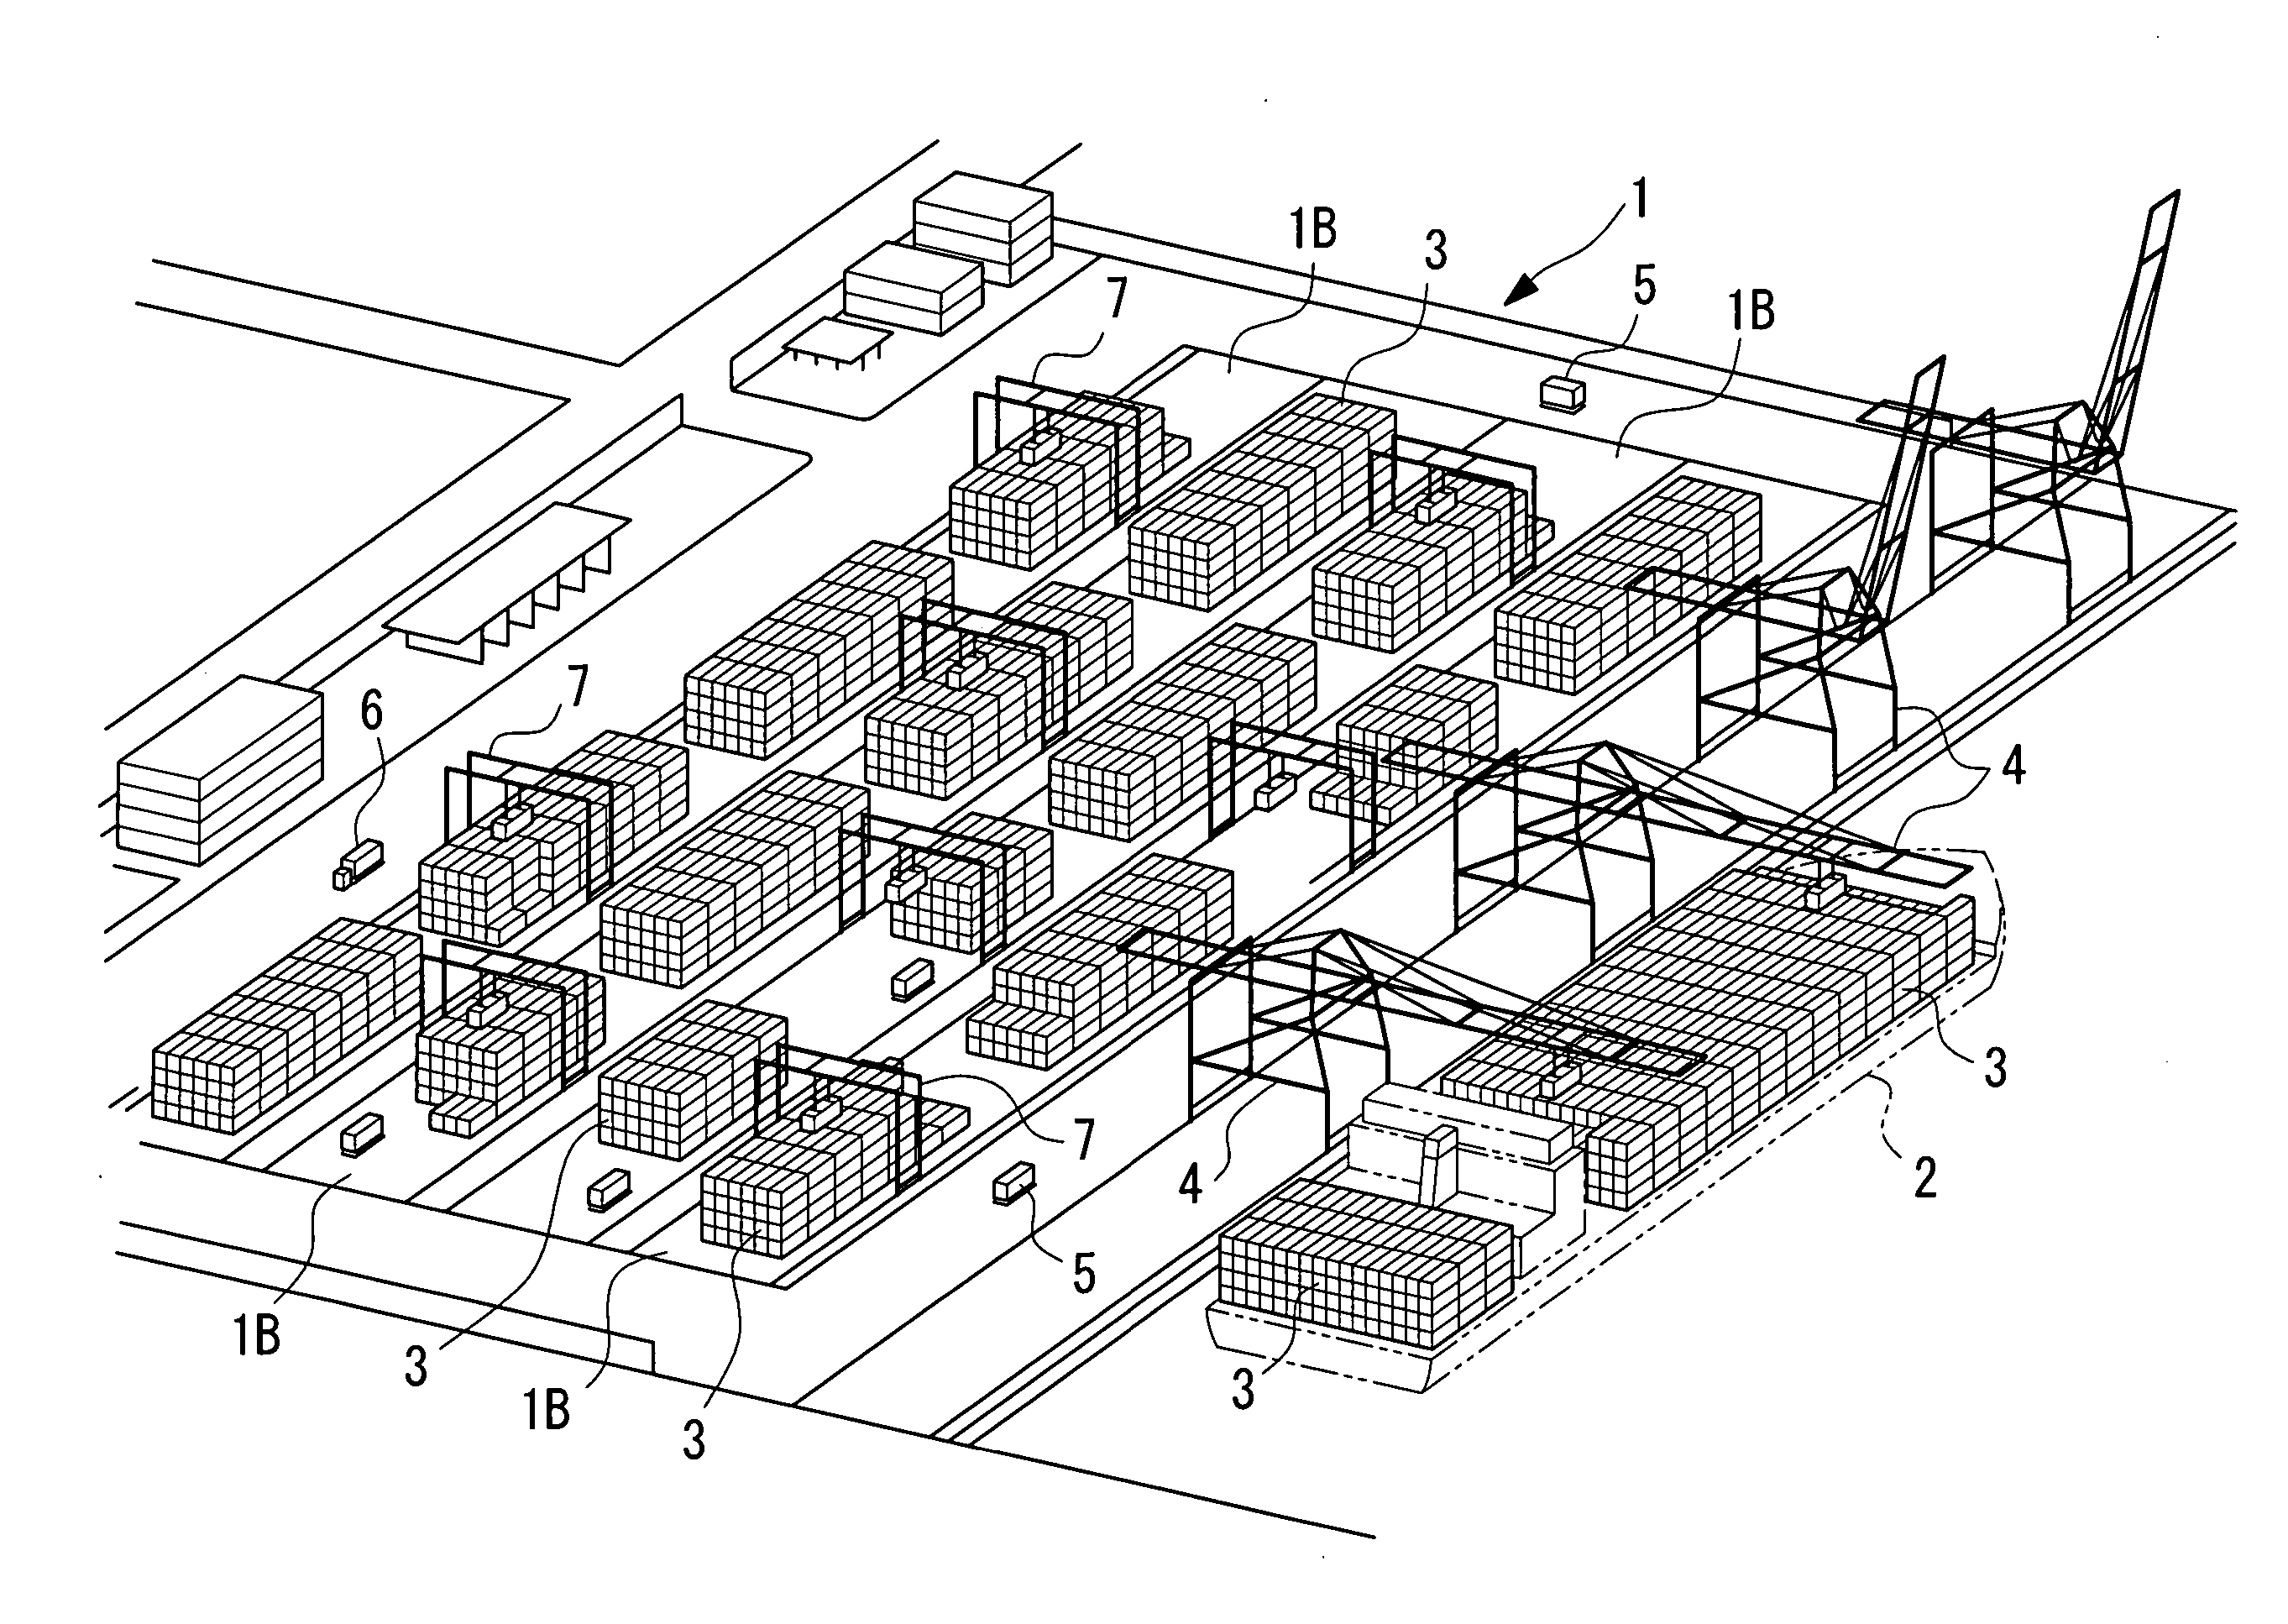 Container handling apparatus, container management system, and method of container handling